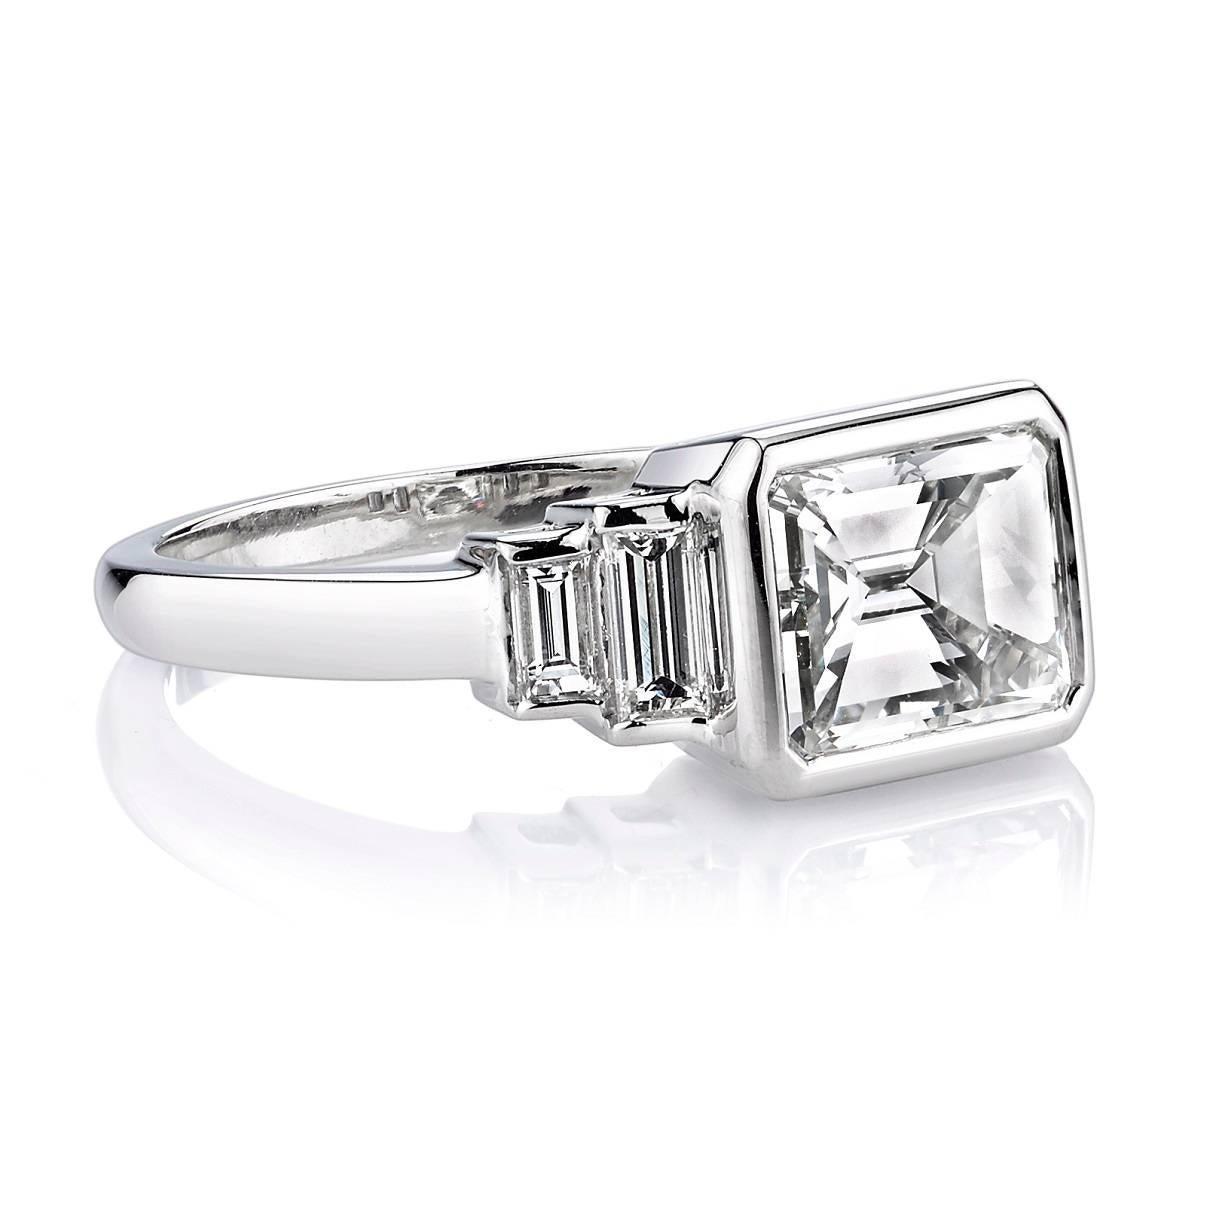 2.40ct J/VVS2 GIA certified Emerald cut diamond set in a handcrafted platinum mounting. A classic and sleek design featuring bezel set diamonds and baguette accents.